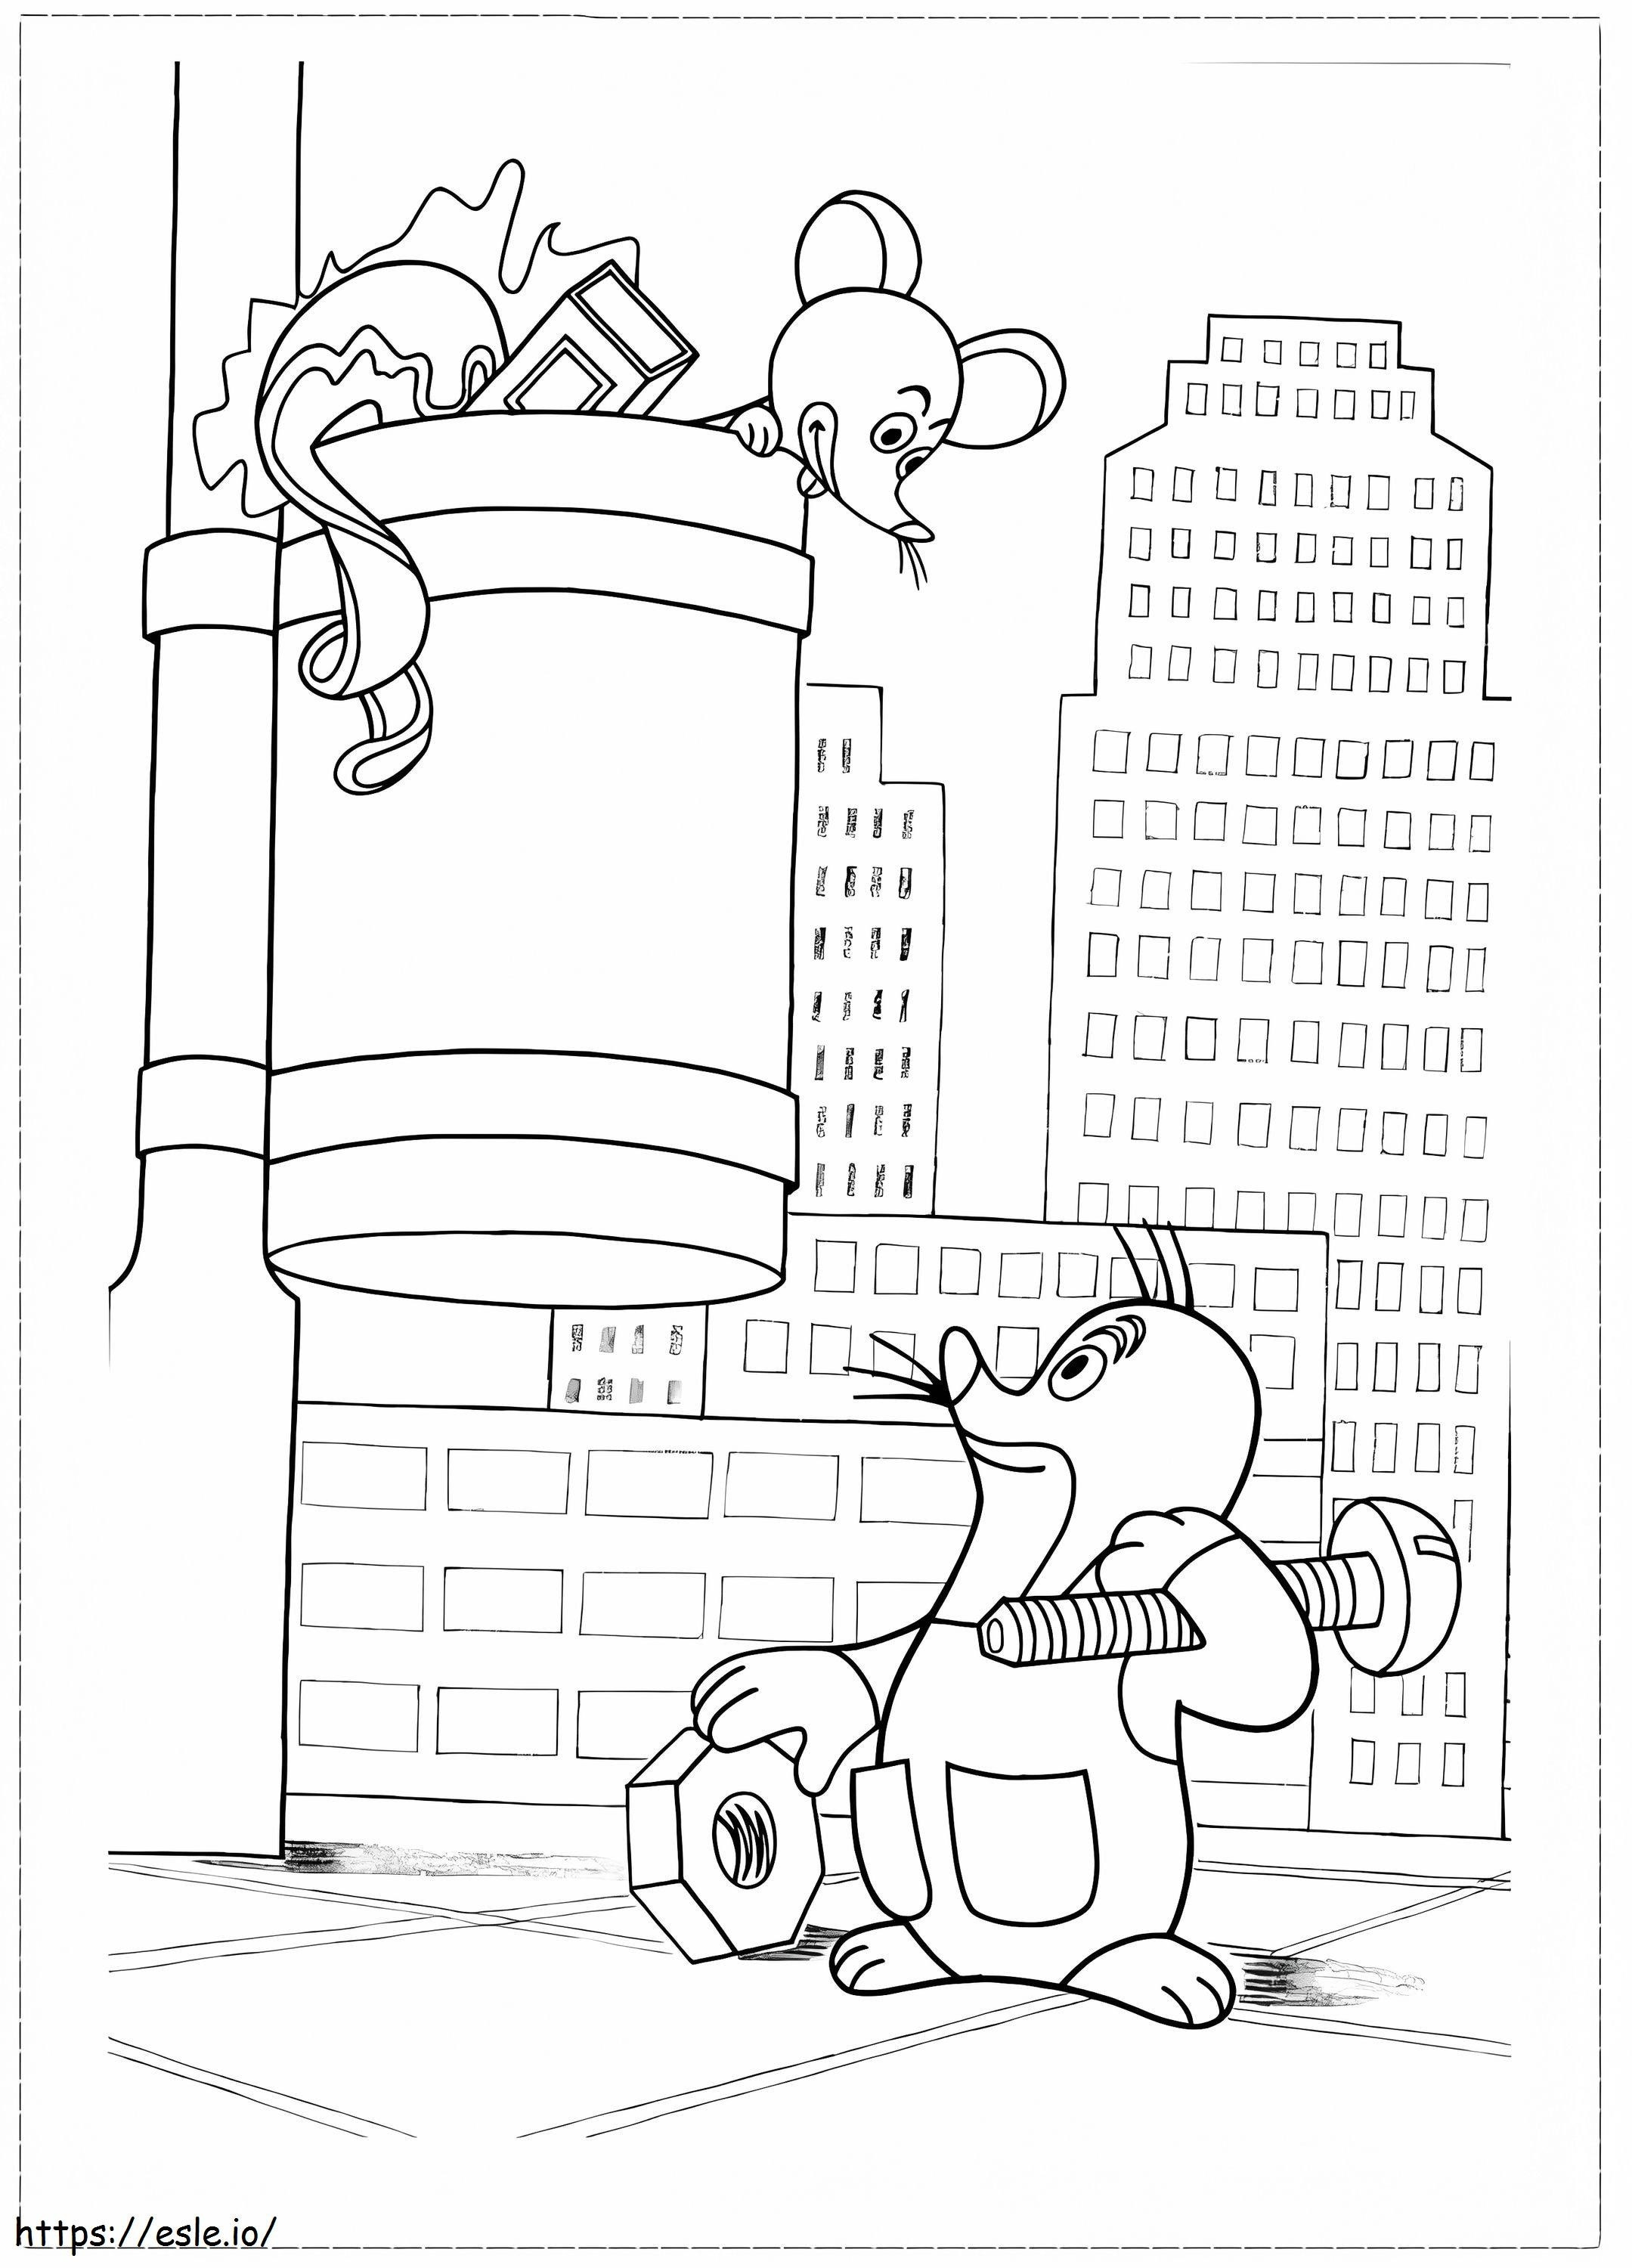 Mouse And Krtek coloring page